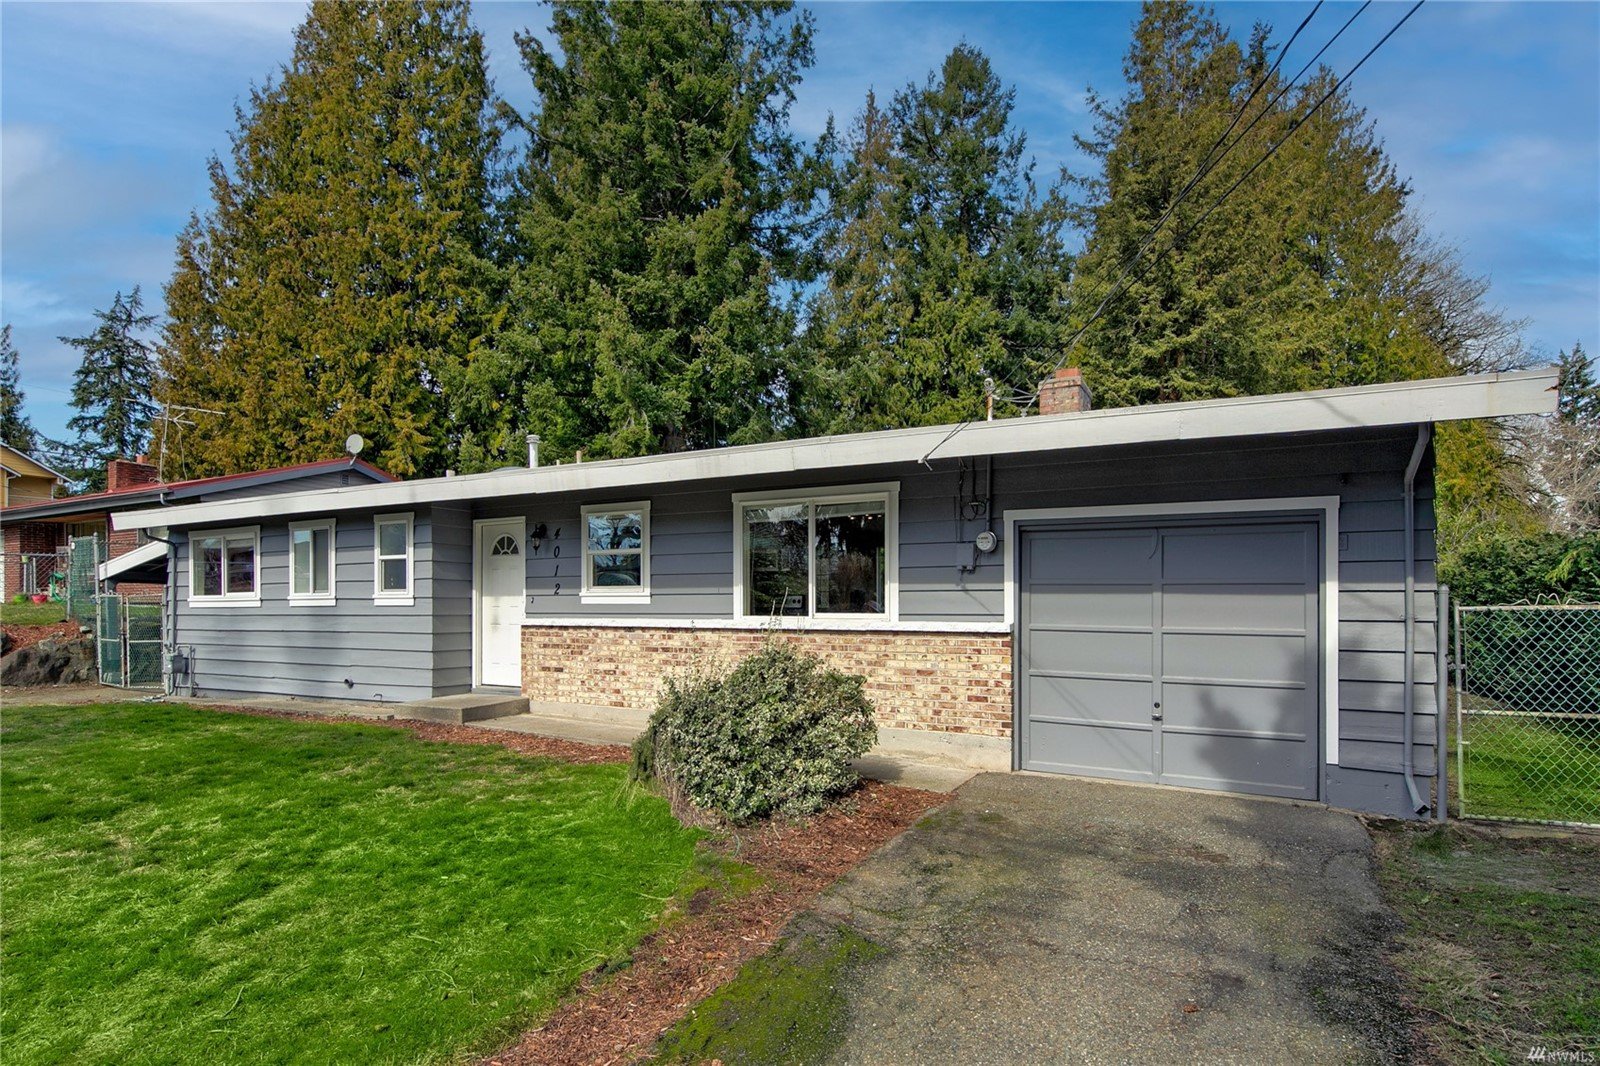 4012 S 173rd Place, SeaTac&lt;strong&gt;Sold for $548,500, Represented Seller&lt;/strong&gt;